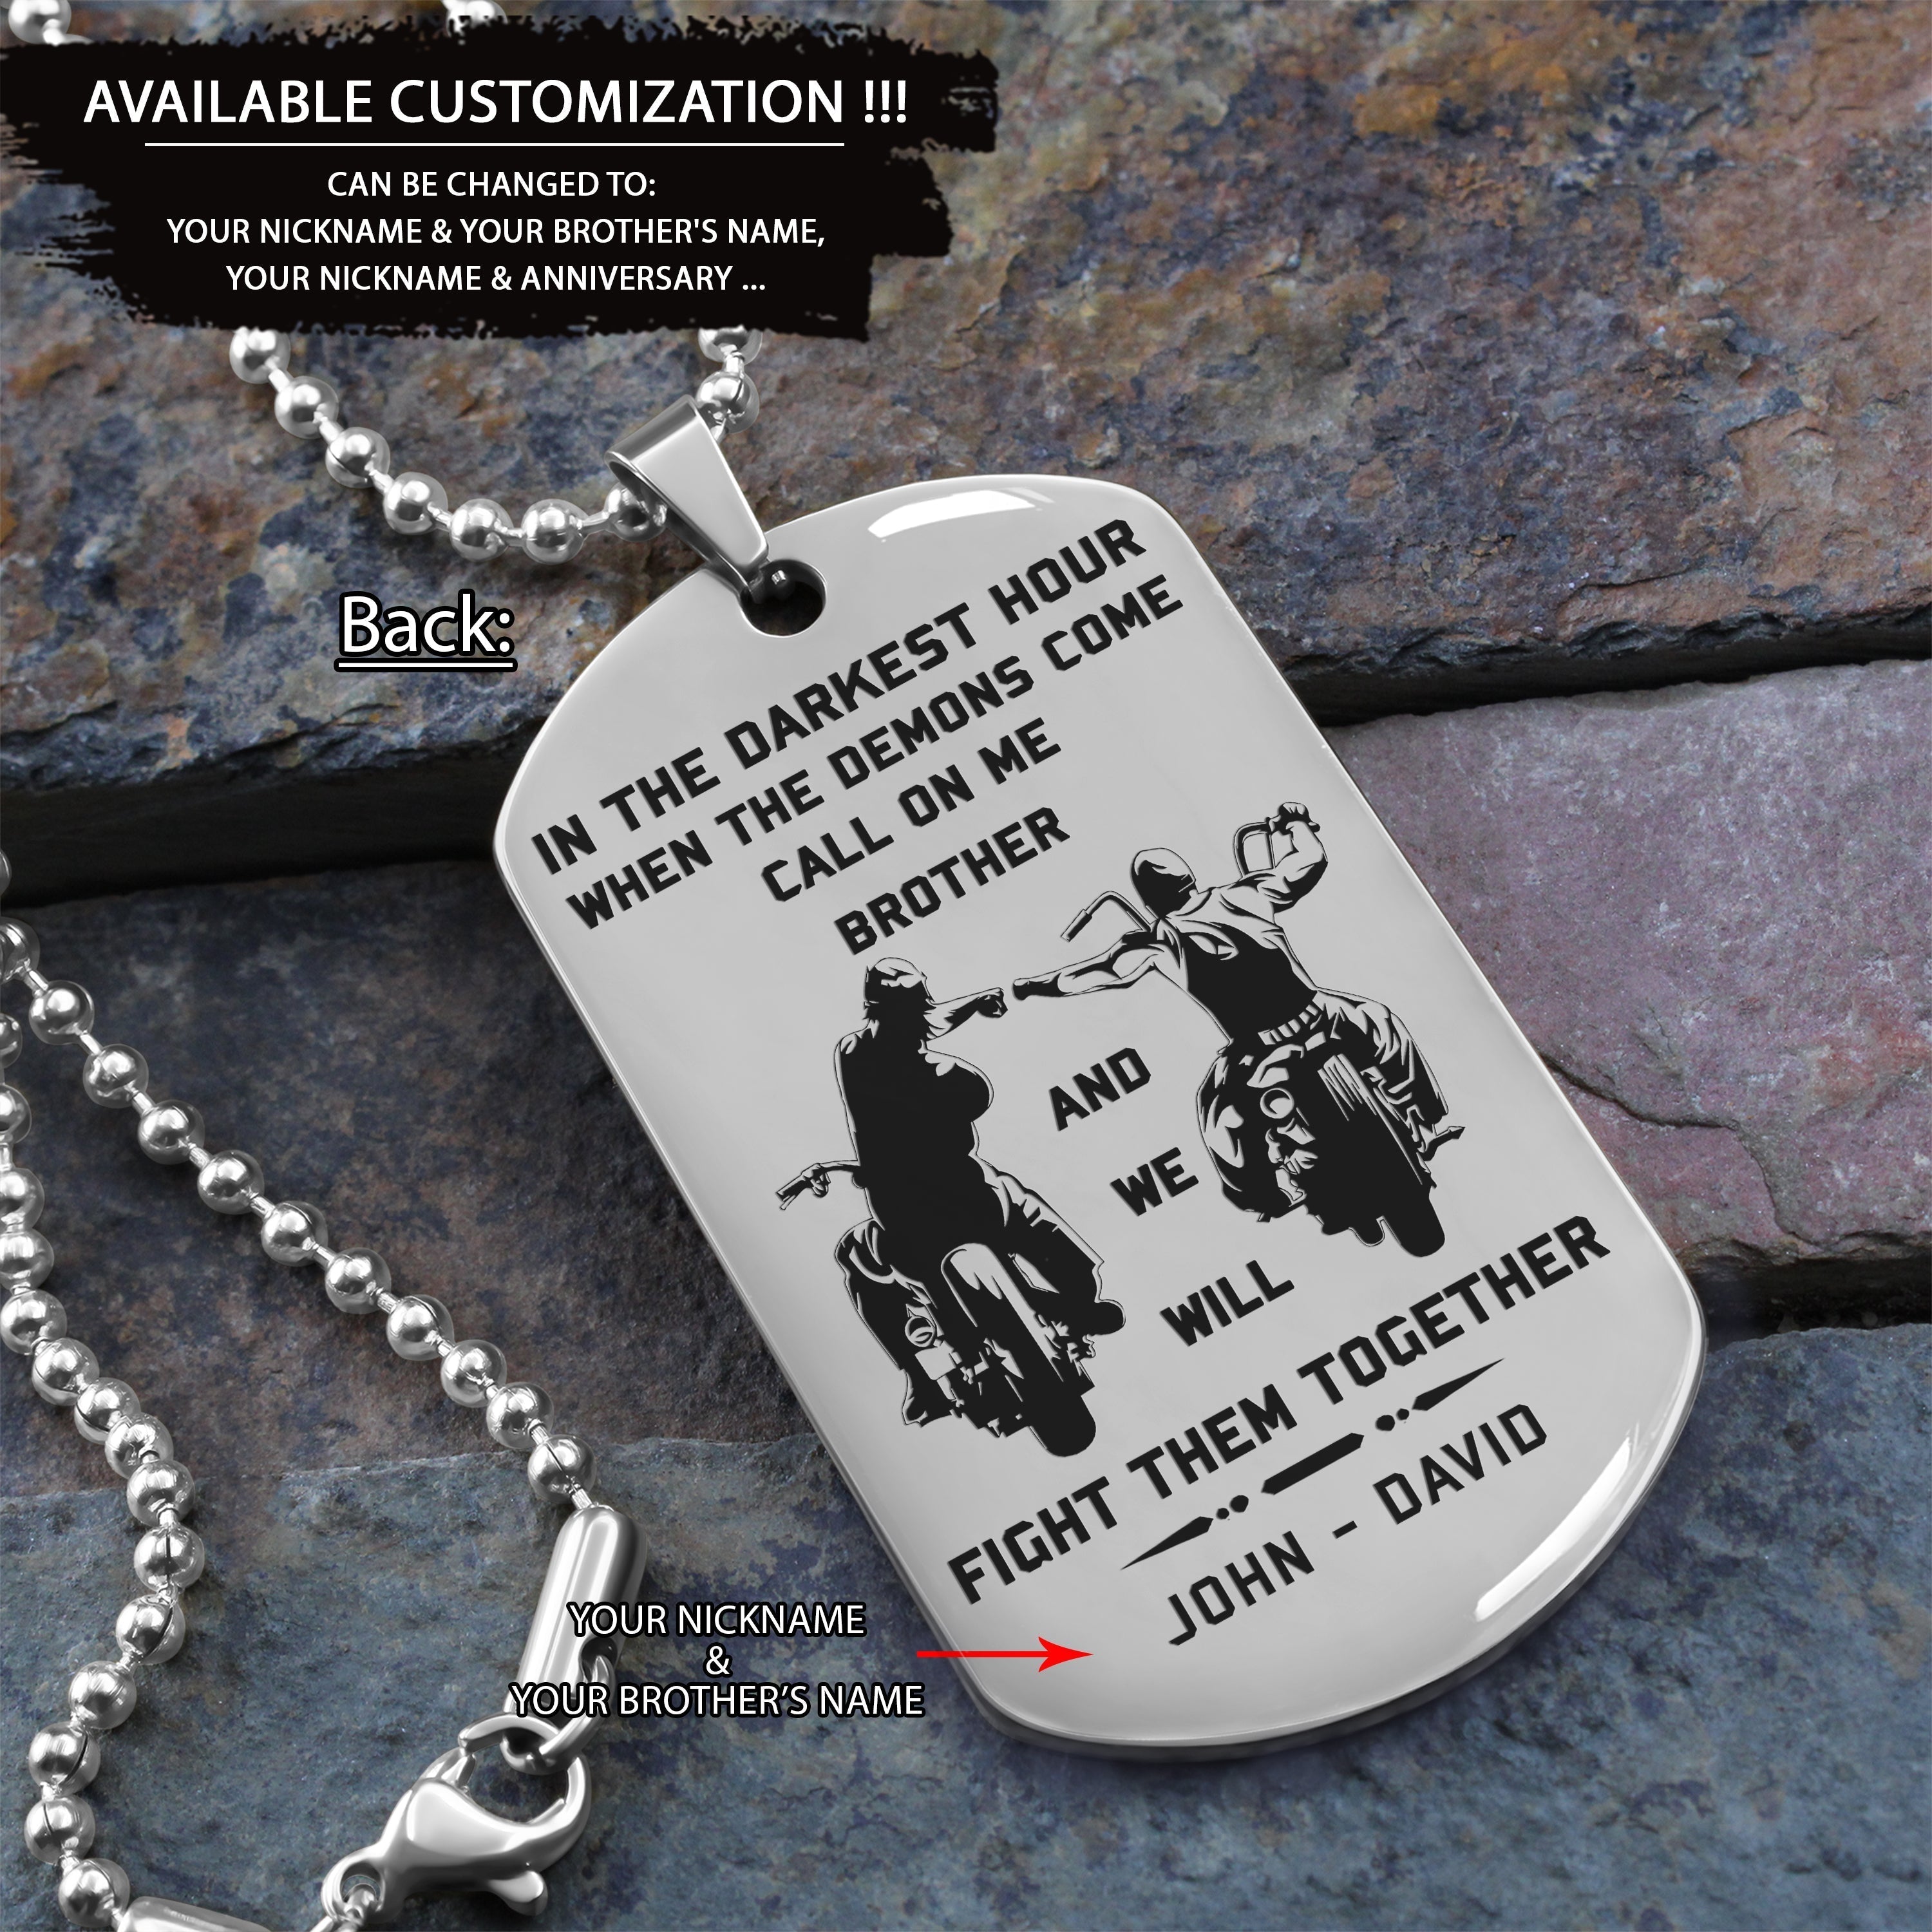 OP Engraved one sided dog tag gift from brother, In the darkest hour When the demons come call on me brother and we will fight them together